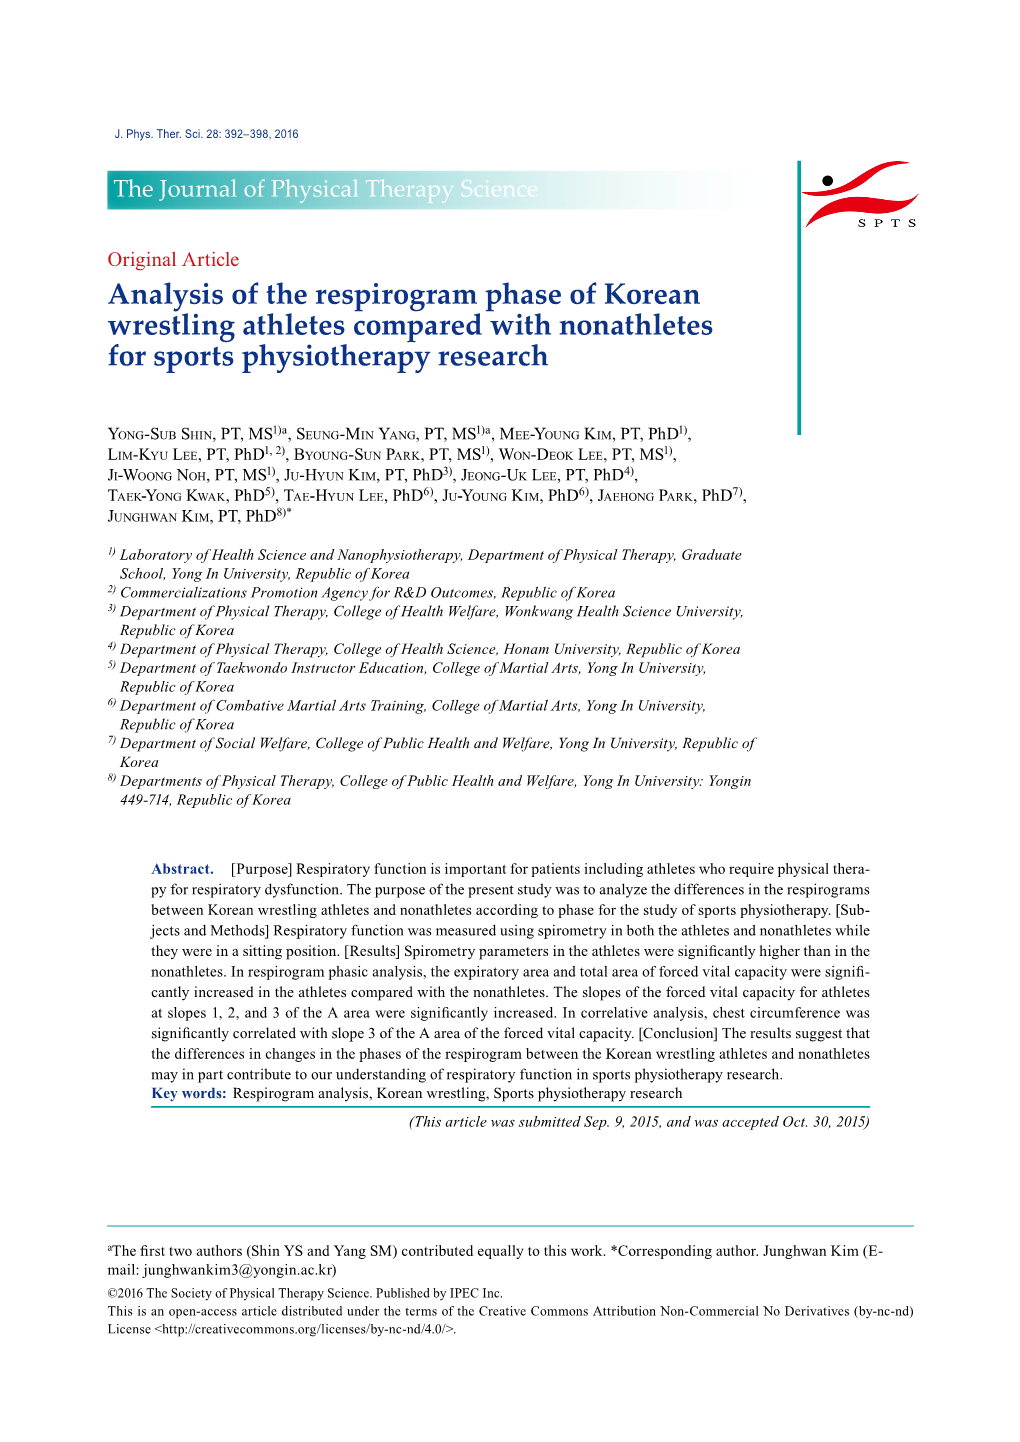 Analysis of the Respirogram Phase of Korean Wrestling Athletes Compared with Nonathletes for Sports Physiotherapy Research